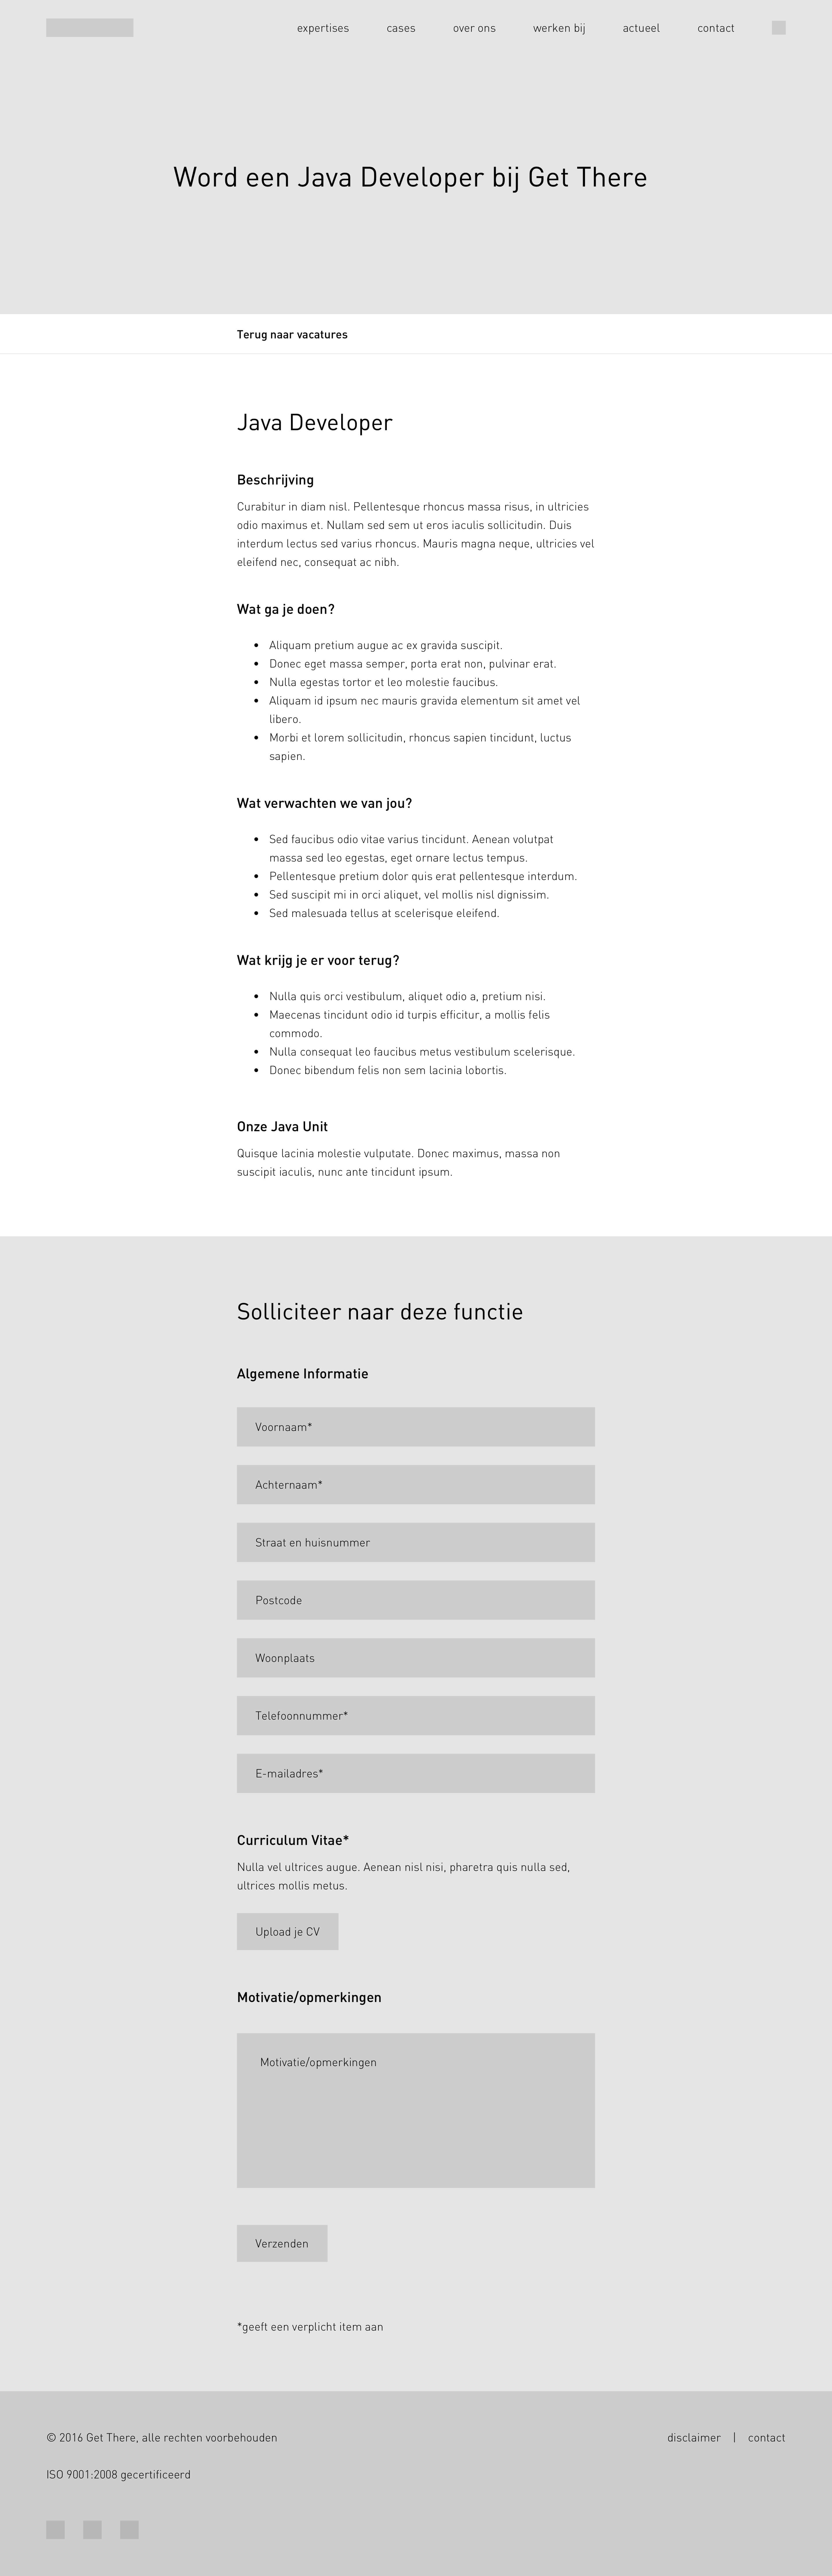 A wireframe for the desktop version of a Job Description page